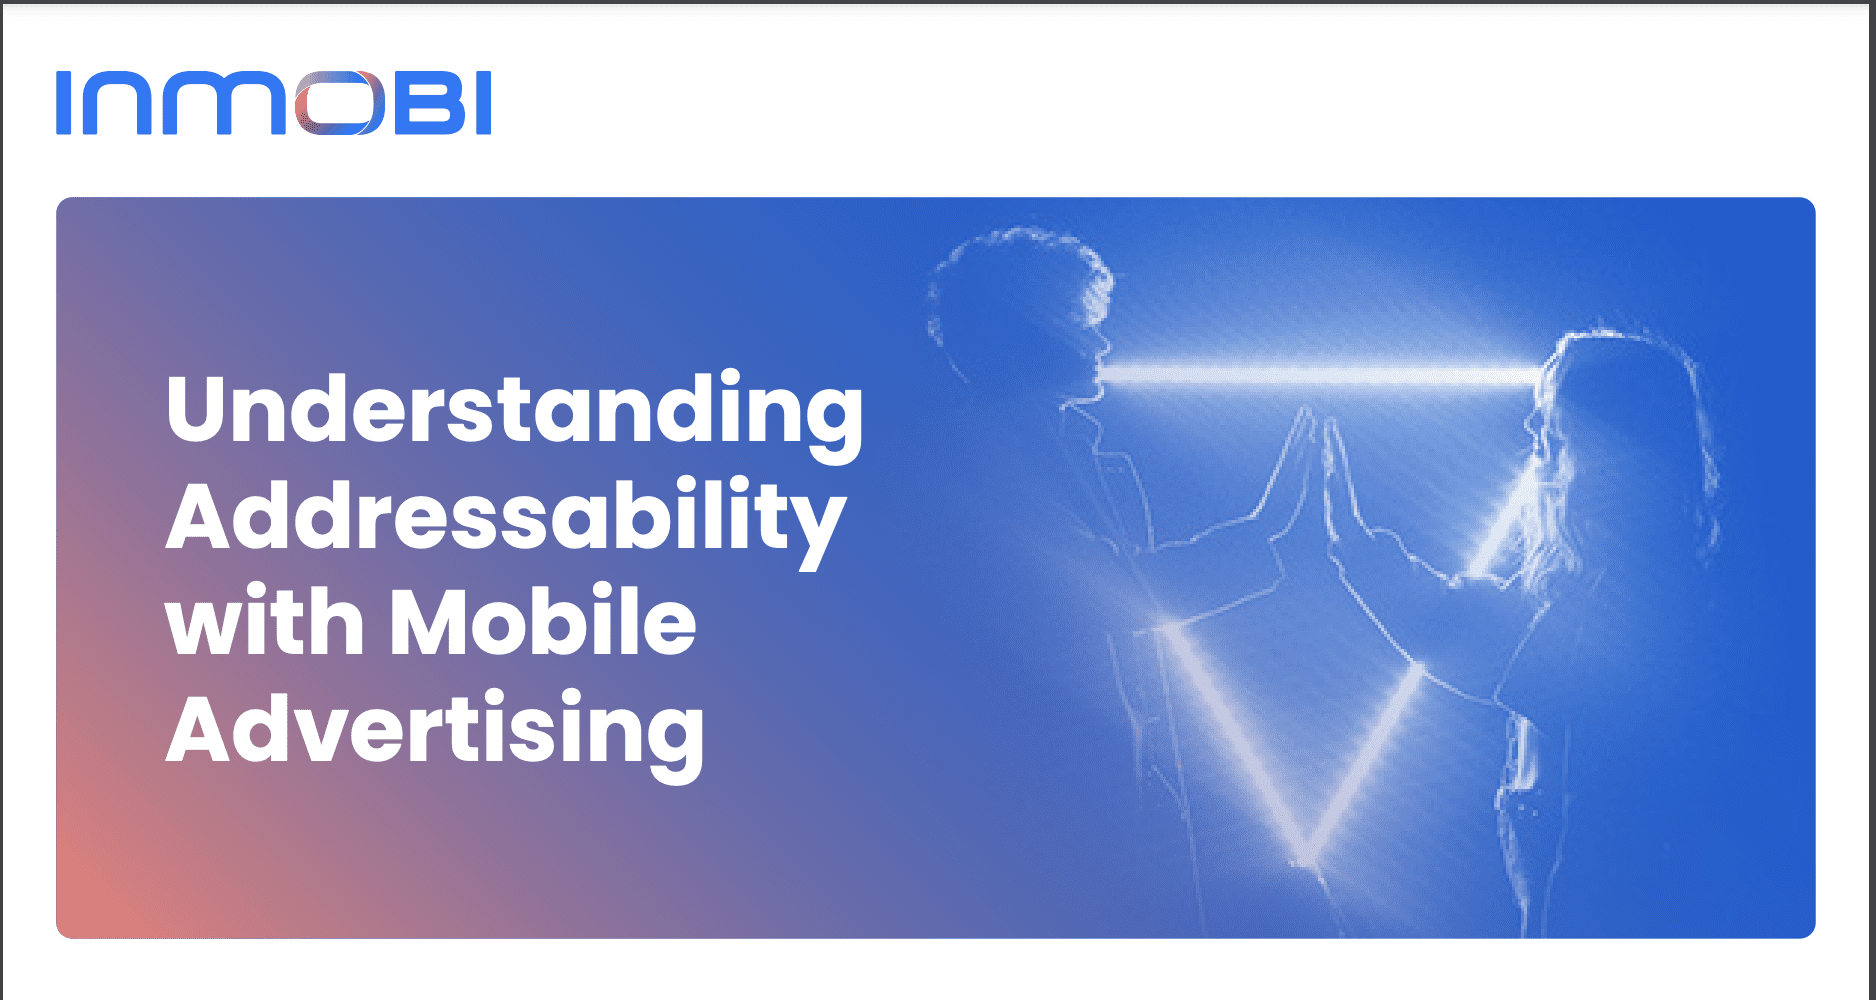 Understanding Addressability with Mobile Advertising [Infographic]